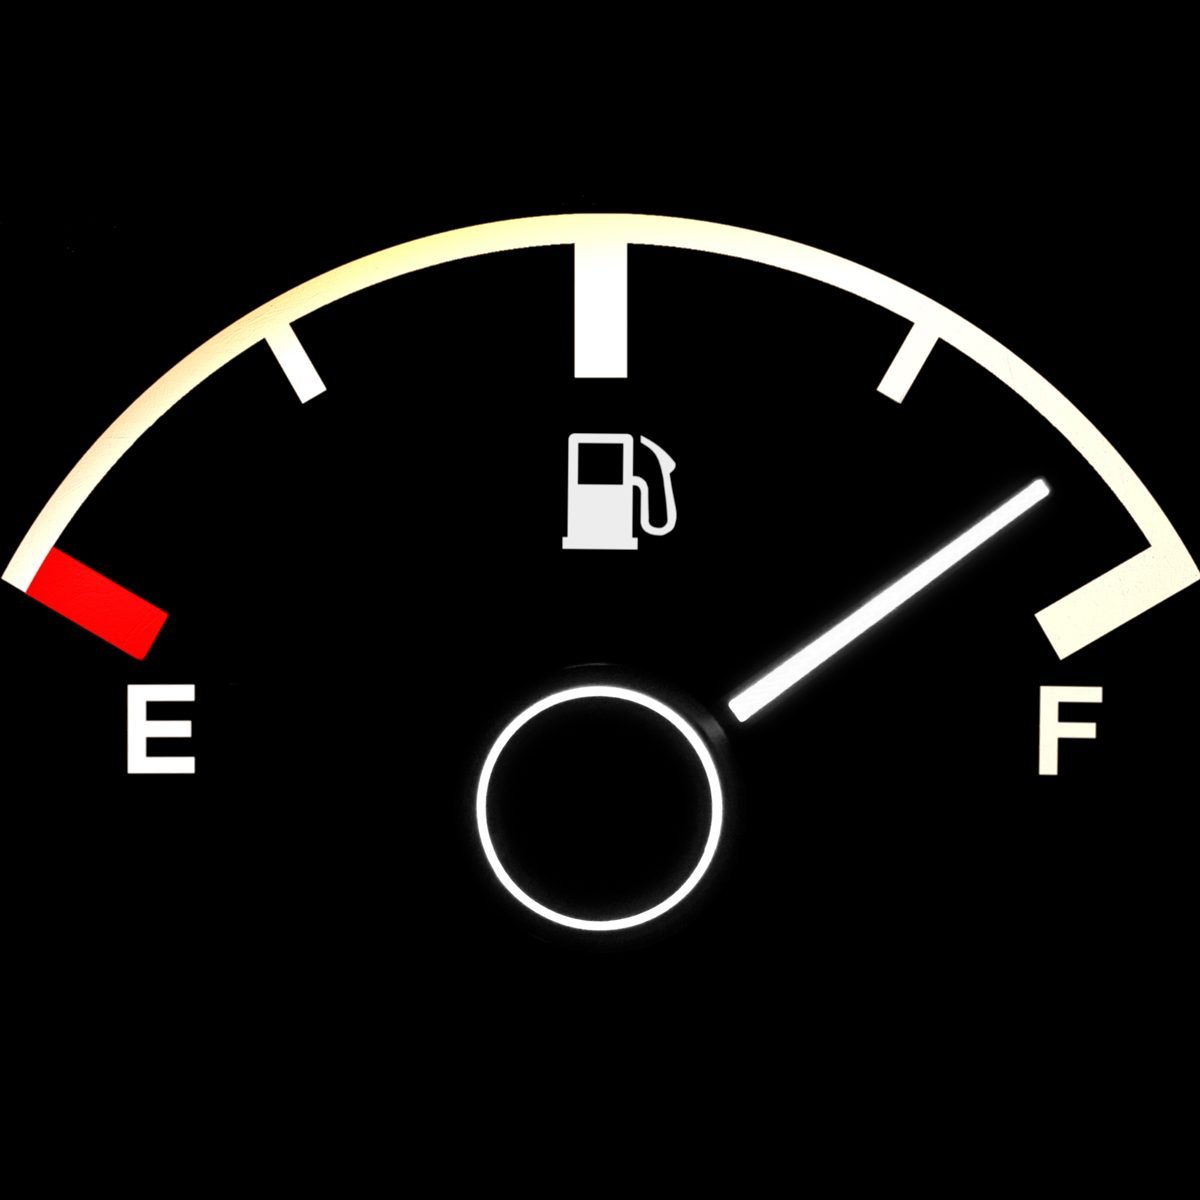 Why topping off your gas tank is a bad idea